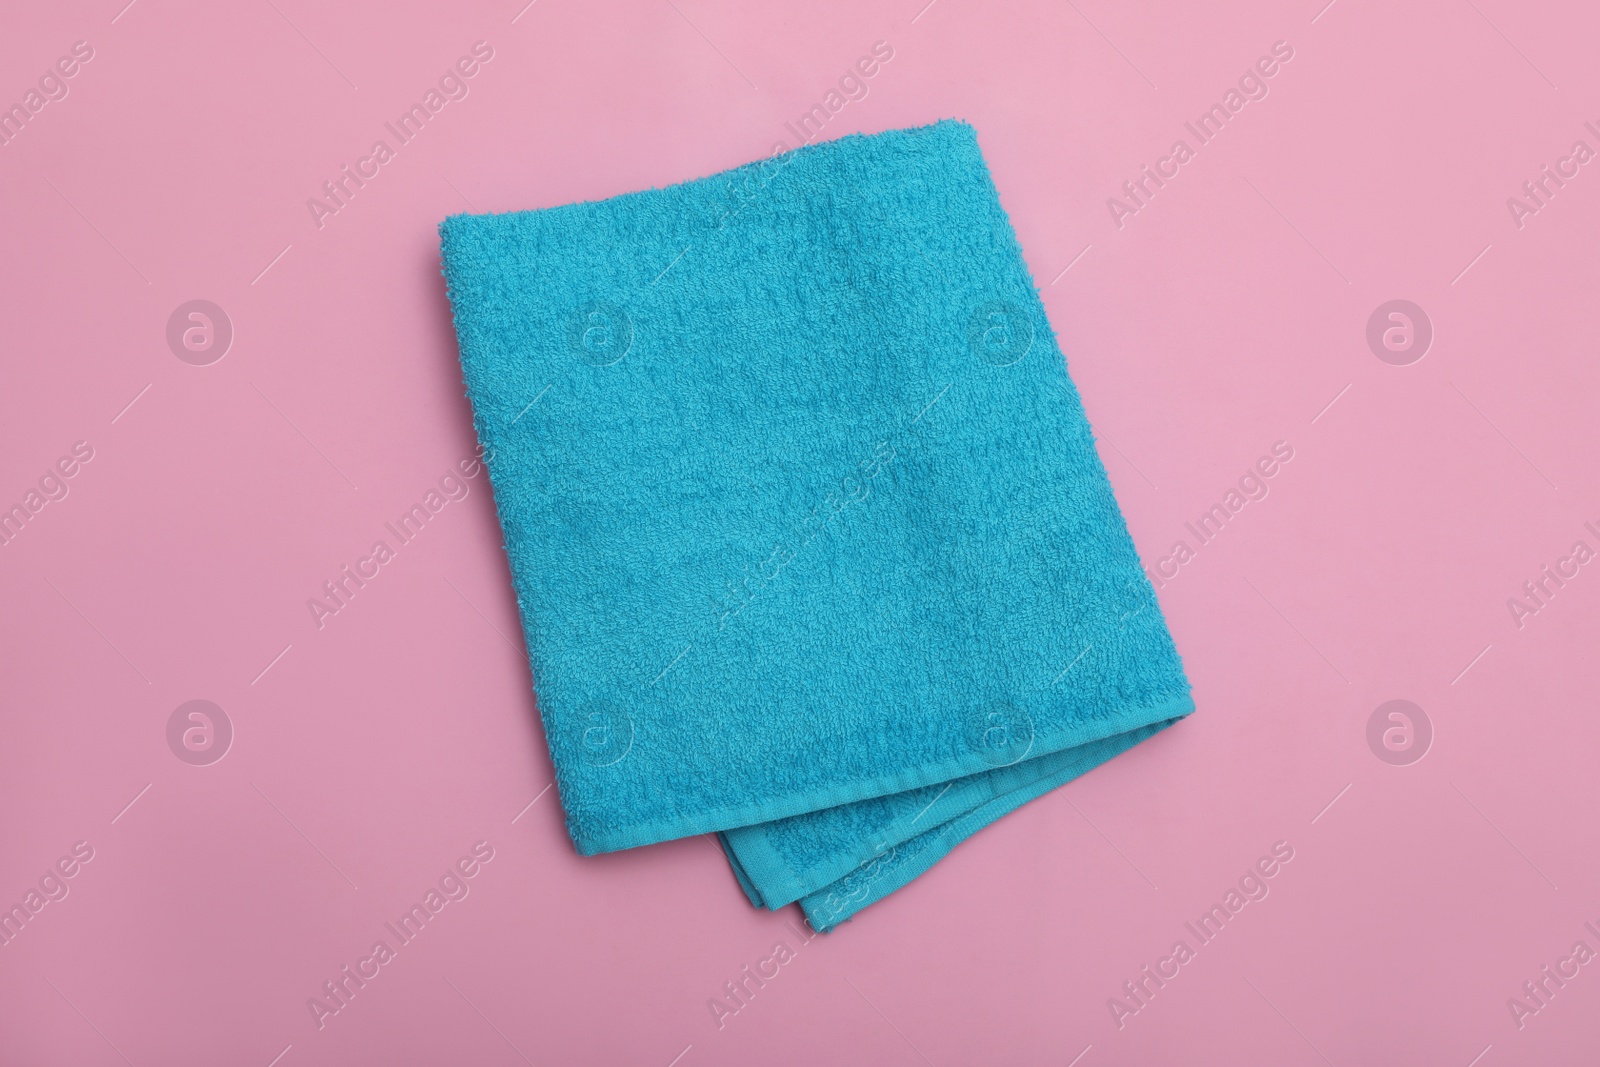 Photo of Folded light blue beach towel on pink background, top view